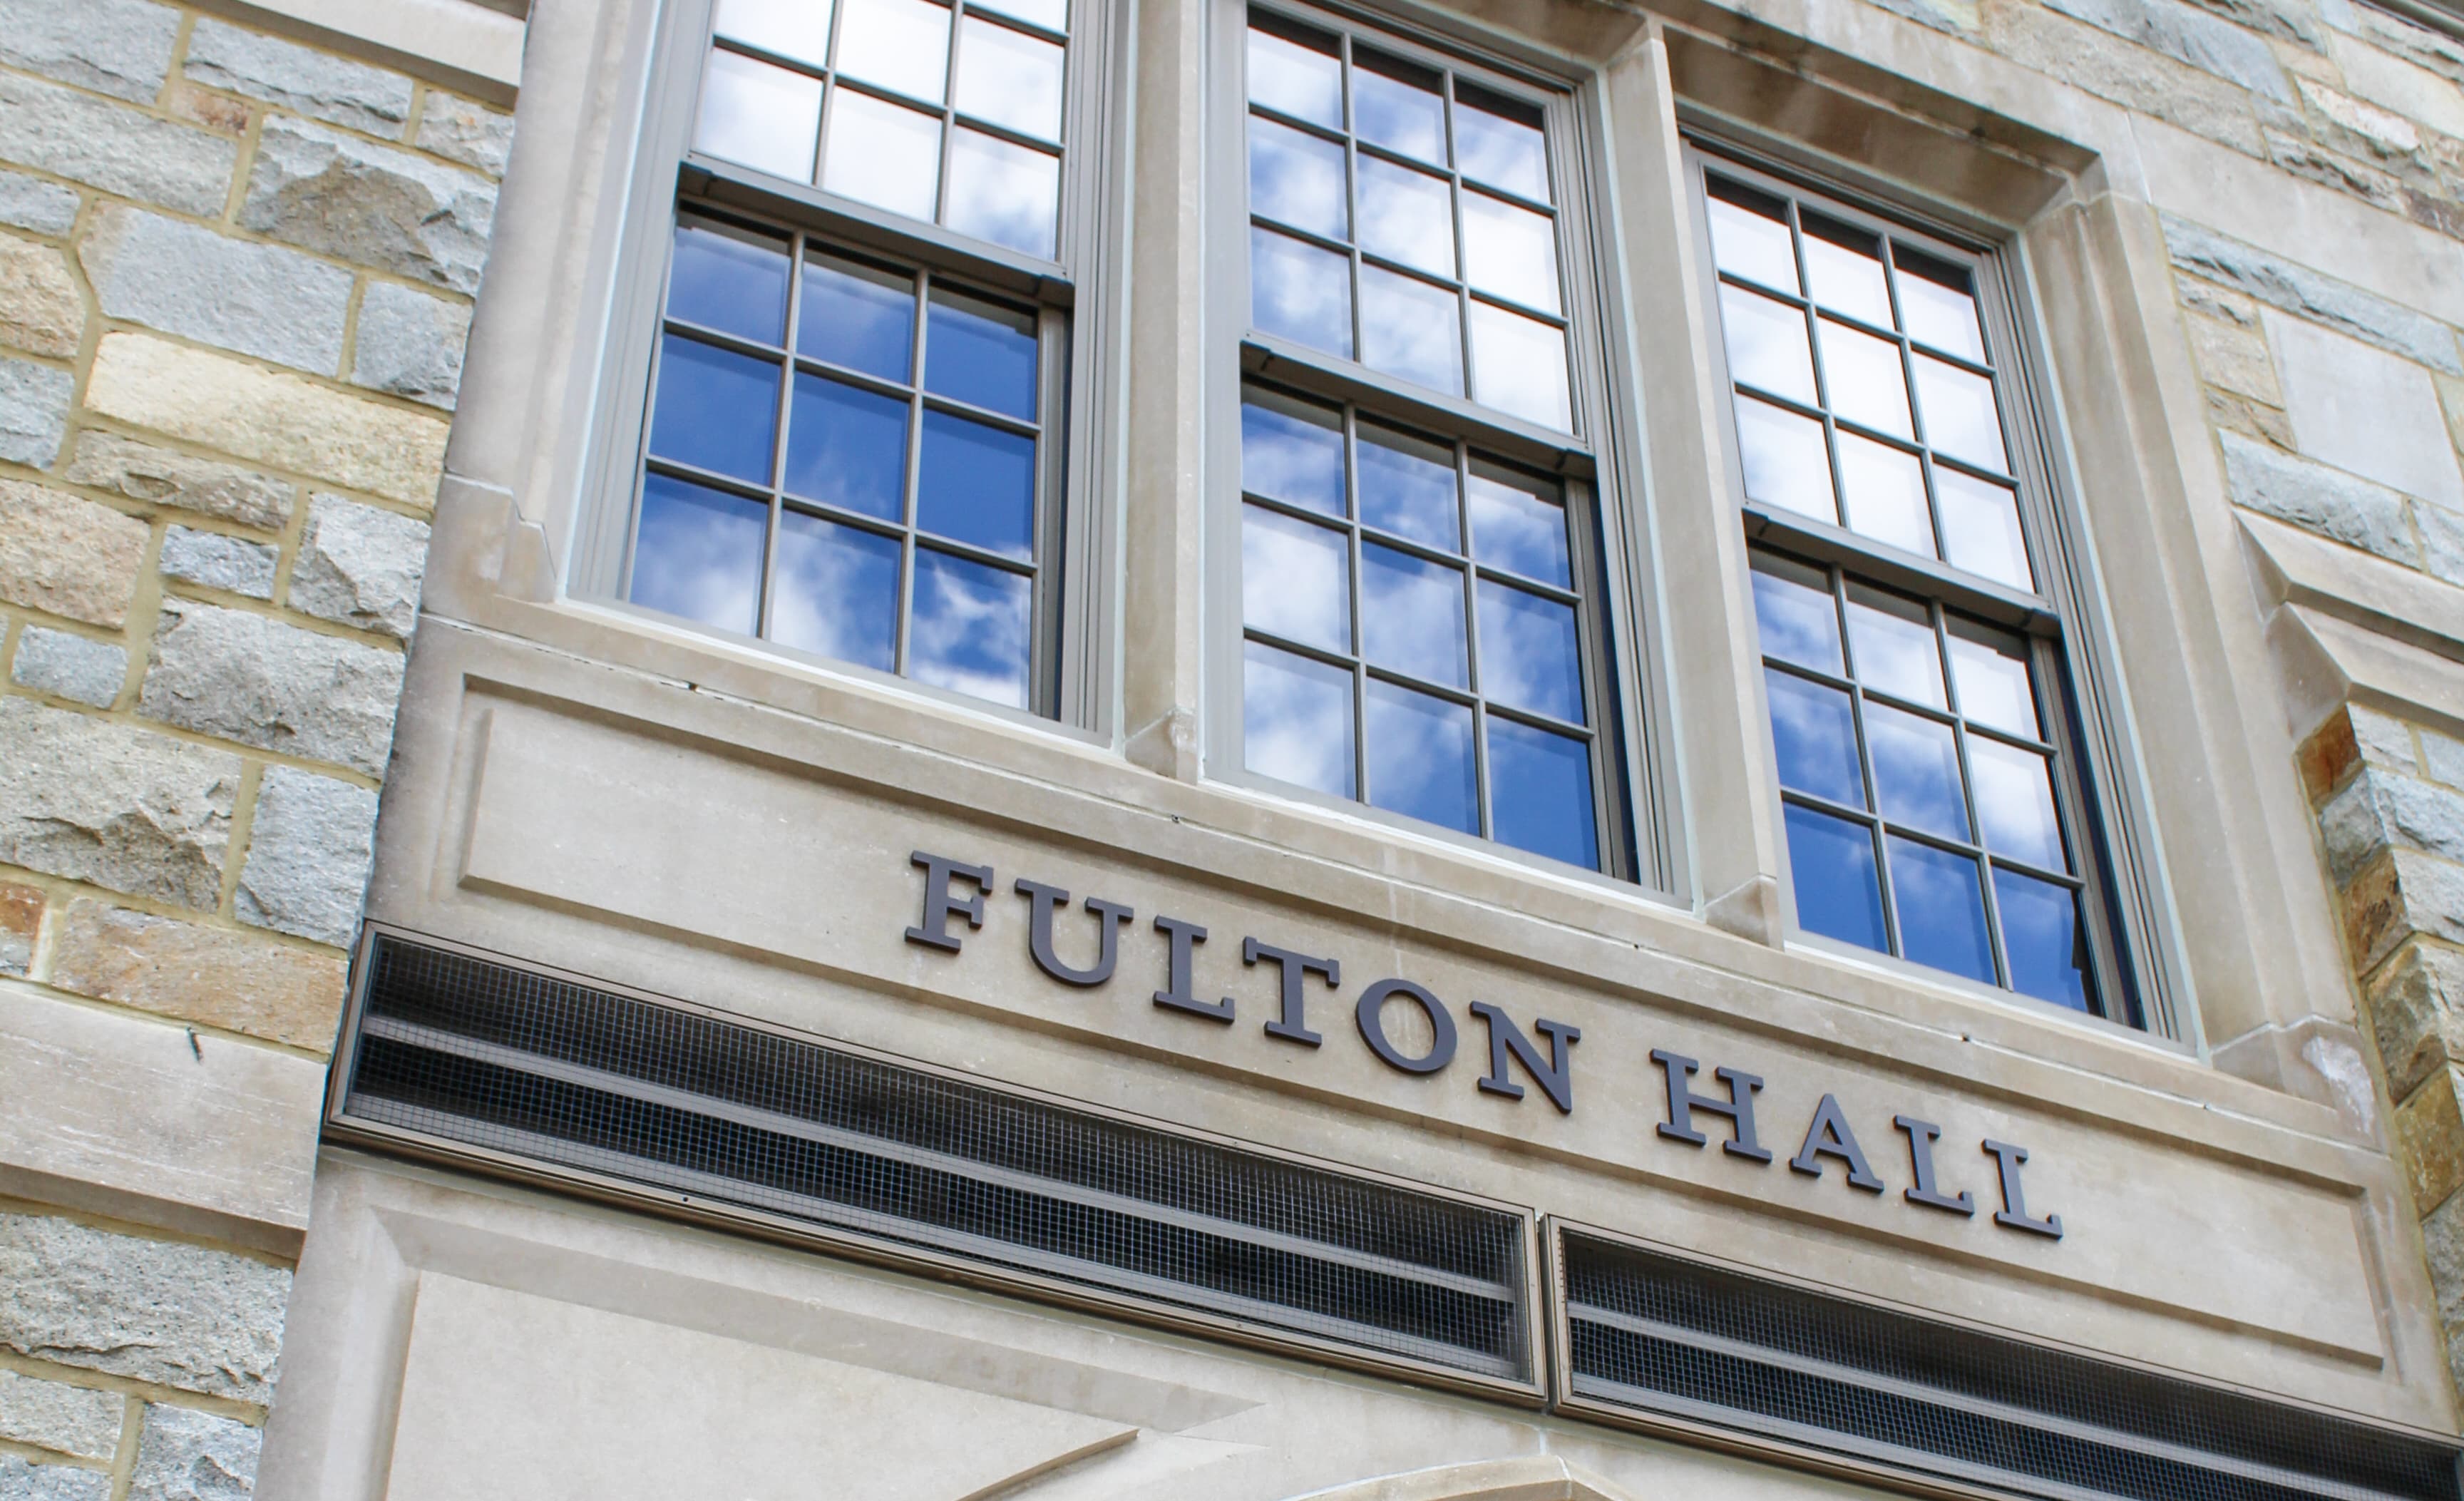 Fulton Hall entryway with blue skies reflected in the window